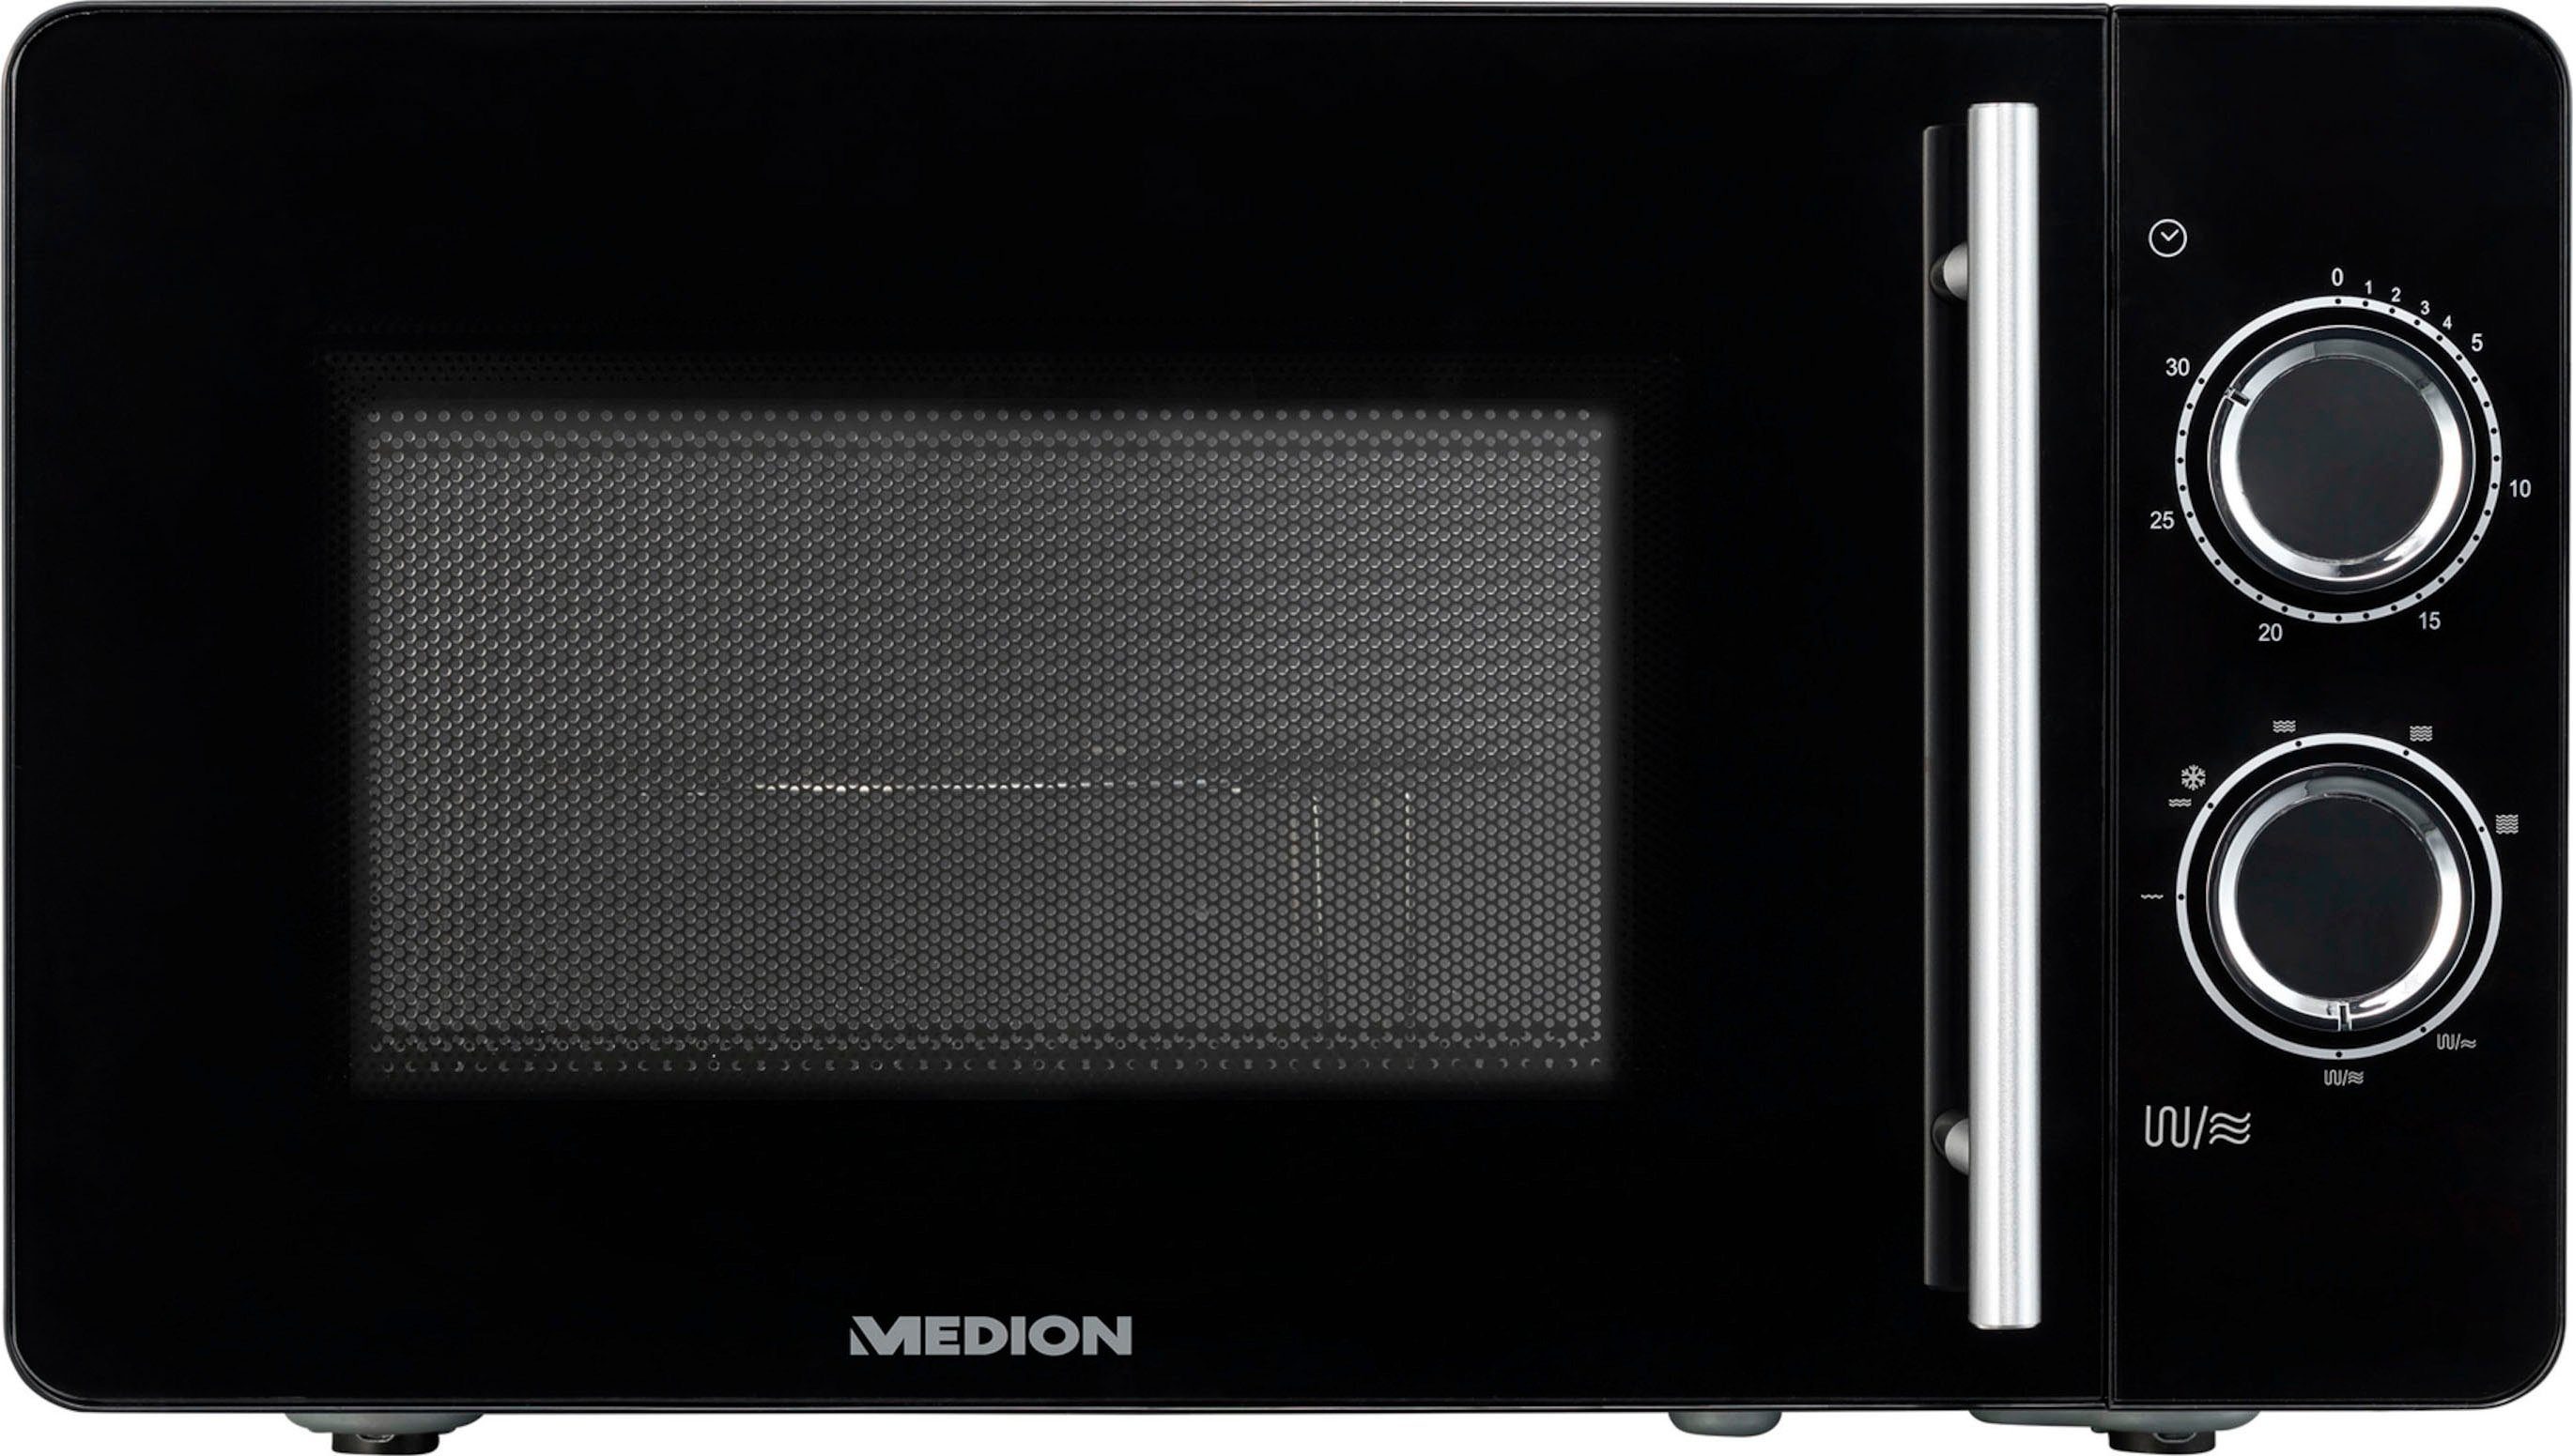 Medion® Mikrowelle Mikrowelle, Kombination Mikrowelle und l, 10495, aus 20 Grill Grill, MD